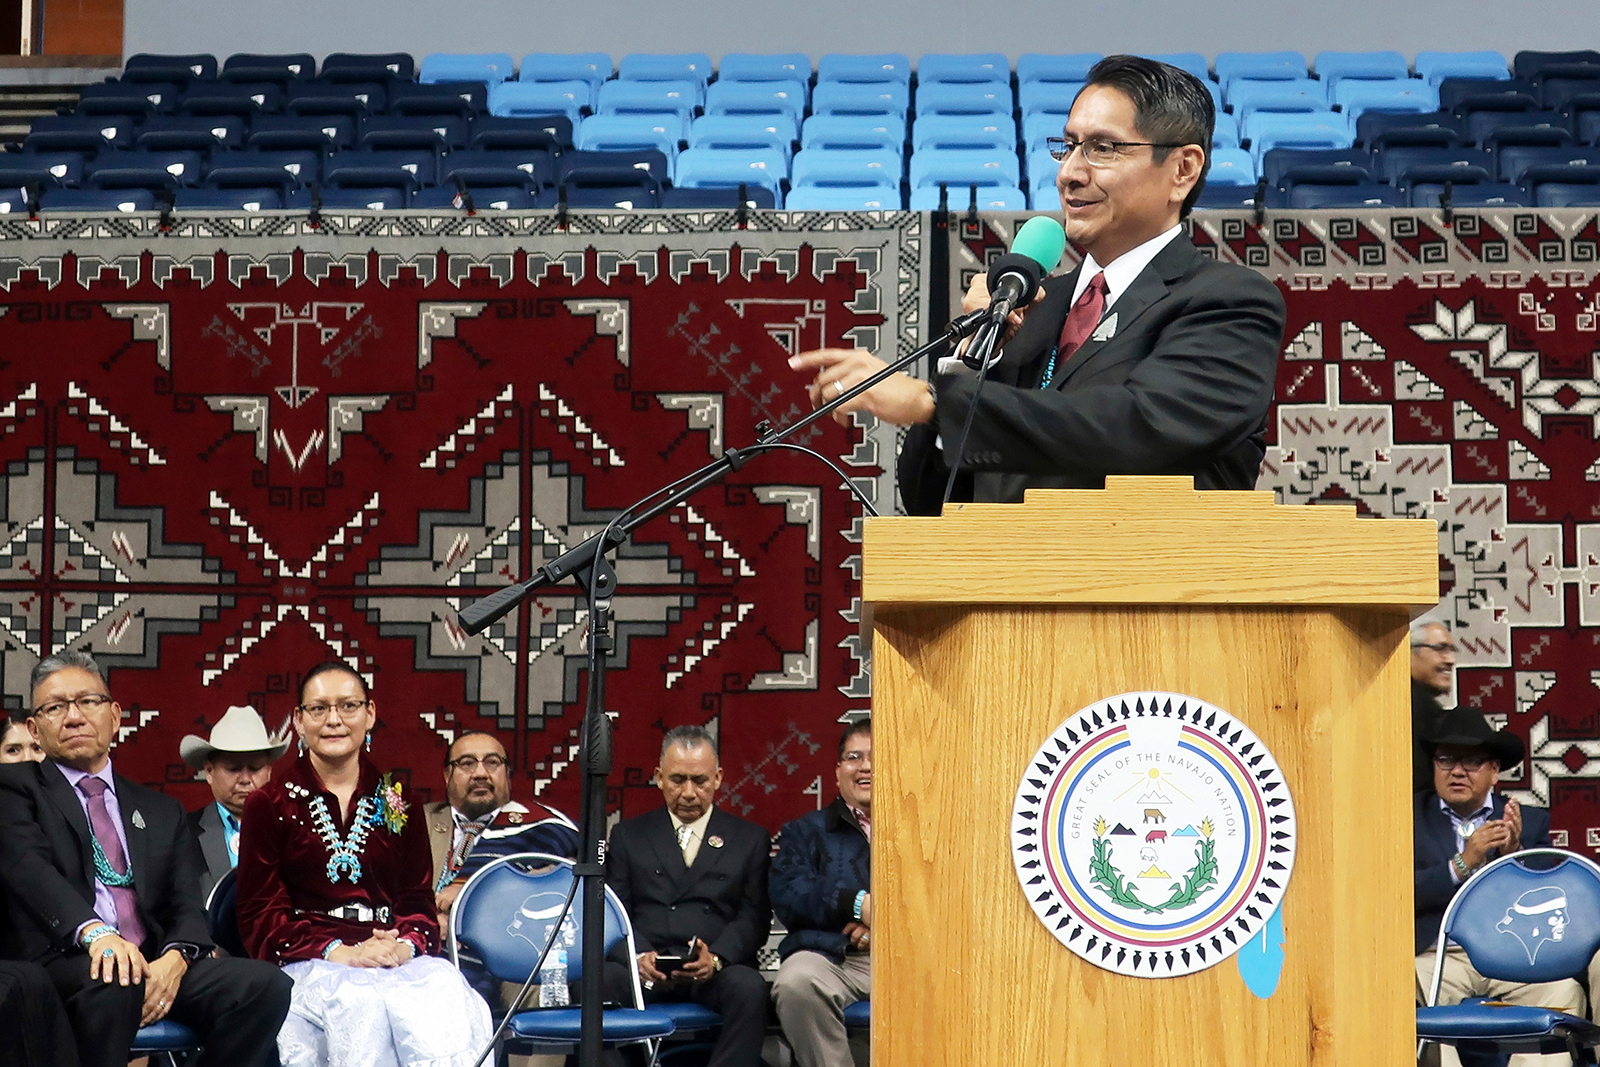 Jonathan Nez addresses a crowd after he was sworn in as president of the Navajo Nation in Fort Defiance, Ariz. 